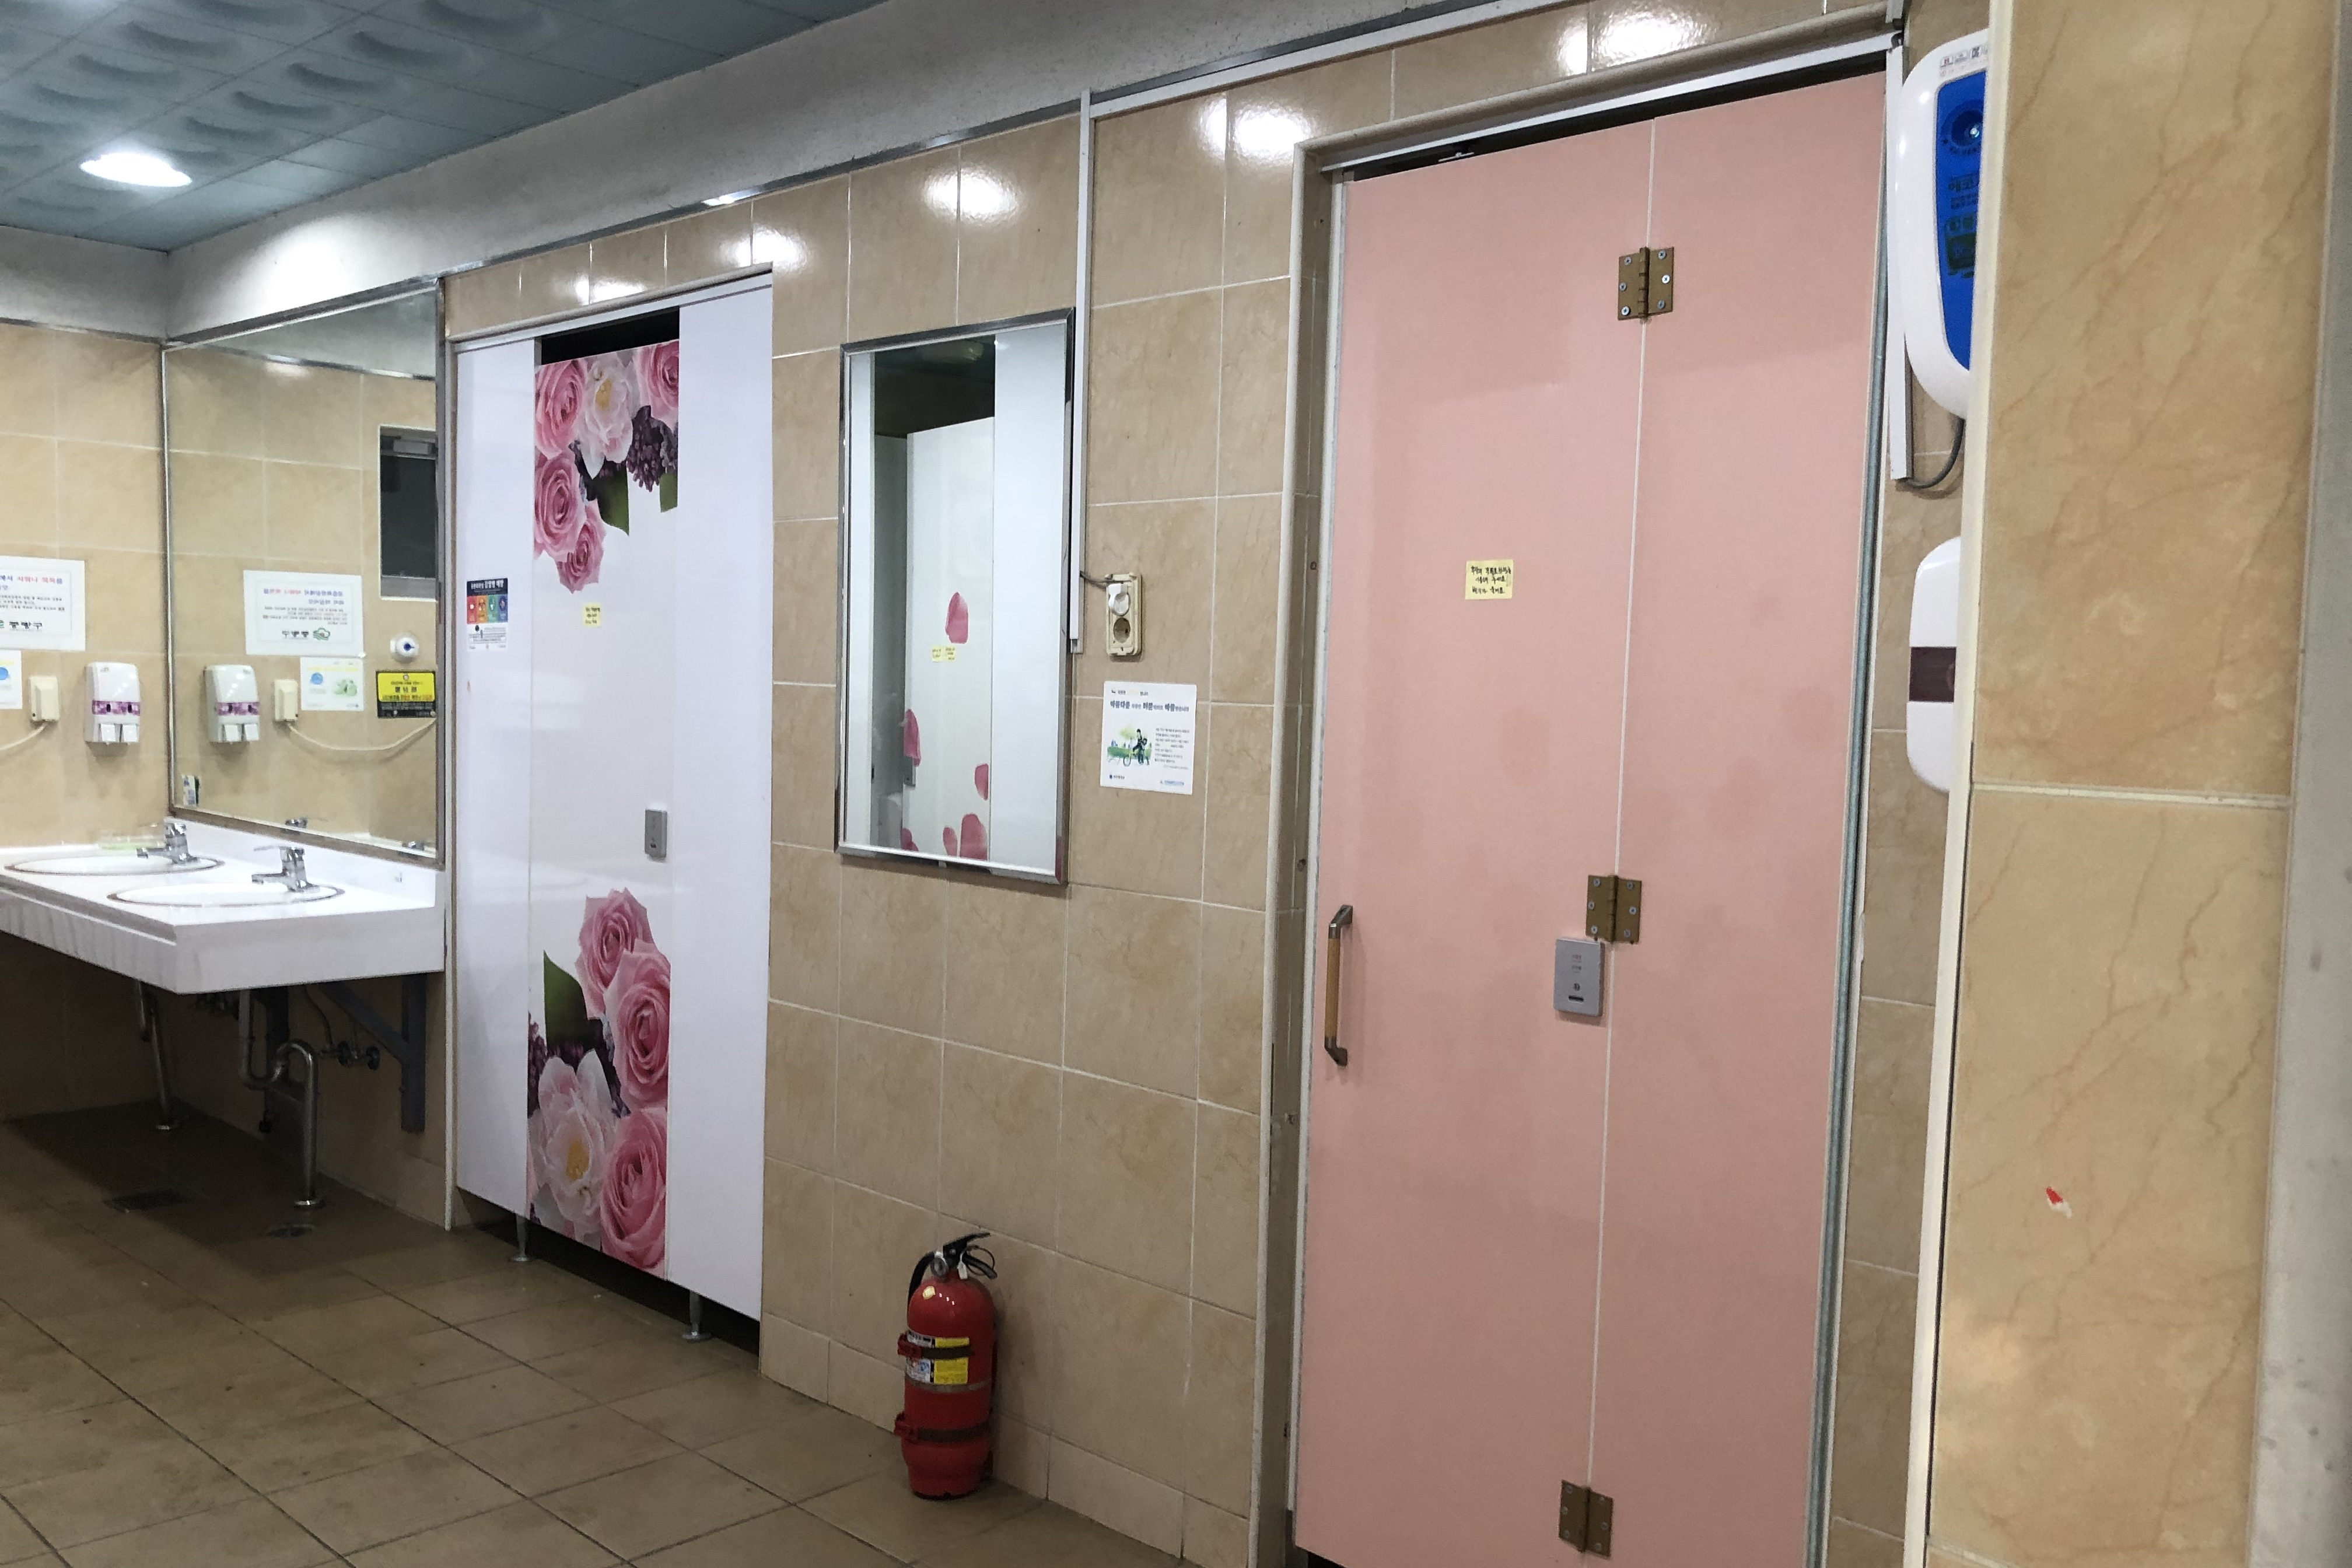 Accessible restrooms0 : Interior view of the accessible restroom at Seoul Rose Park (Jungnang Rose Park)